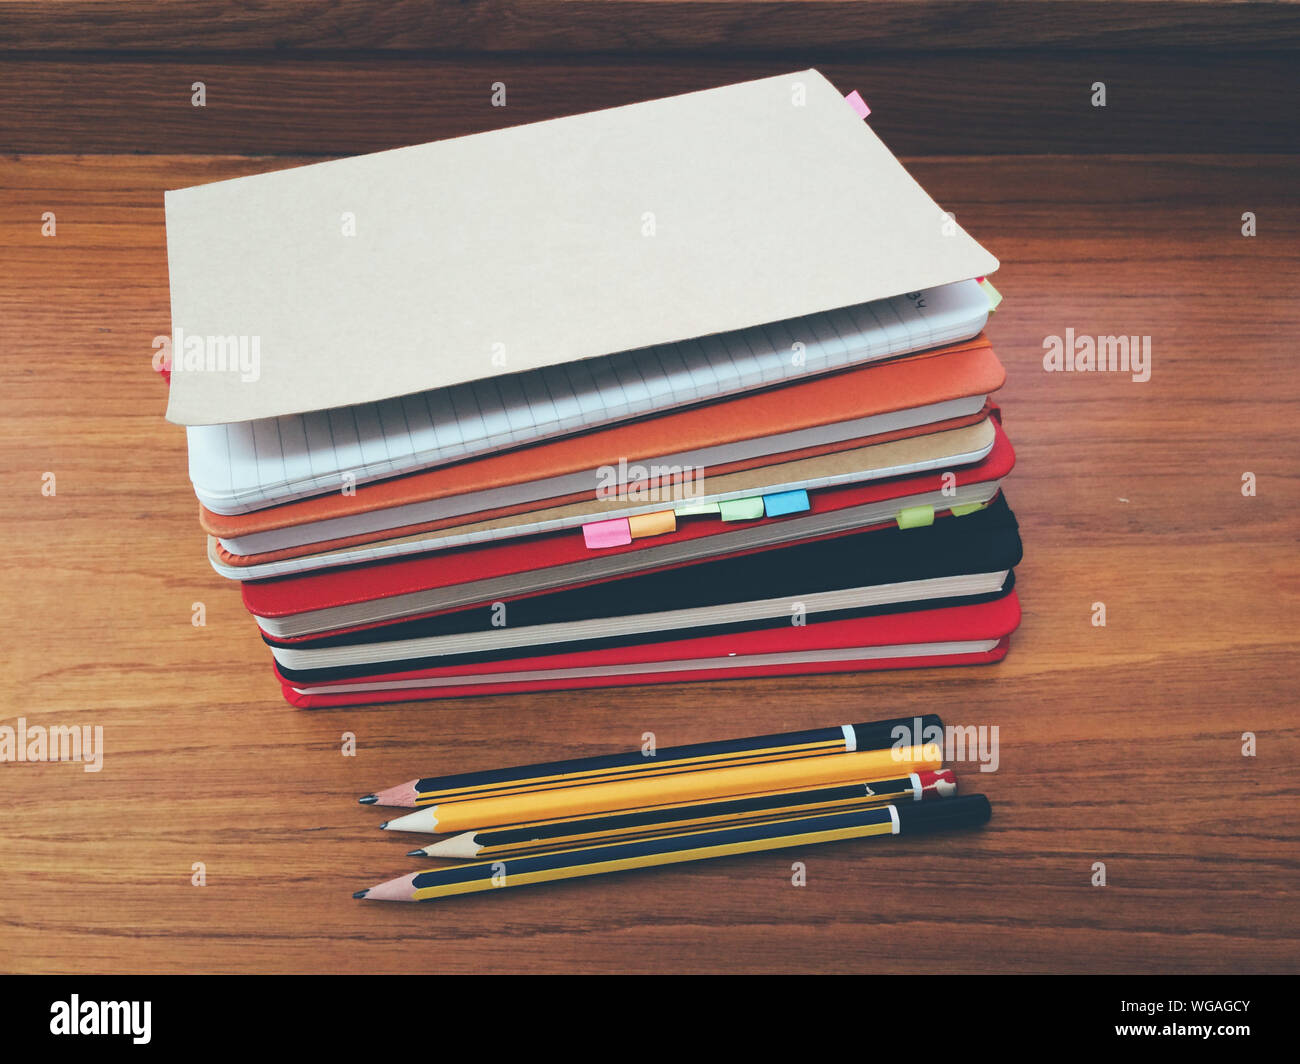 High Angle View Of Diaries With Pencils On Wooden Table Stock Photo